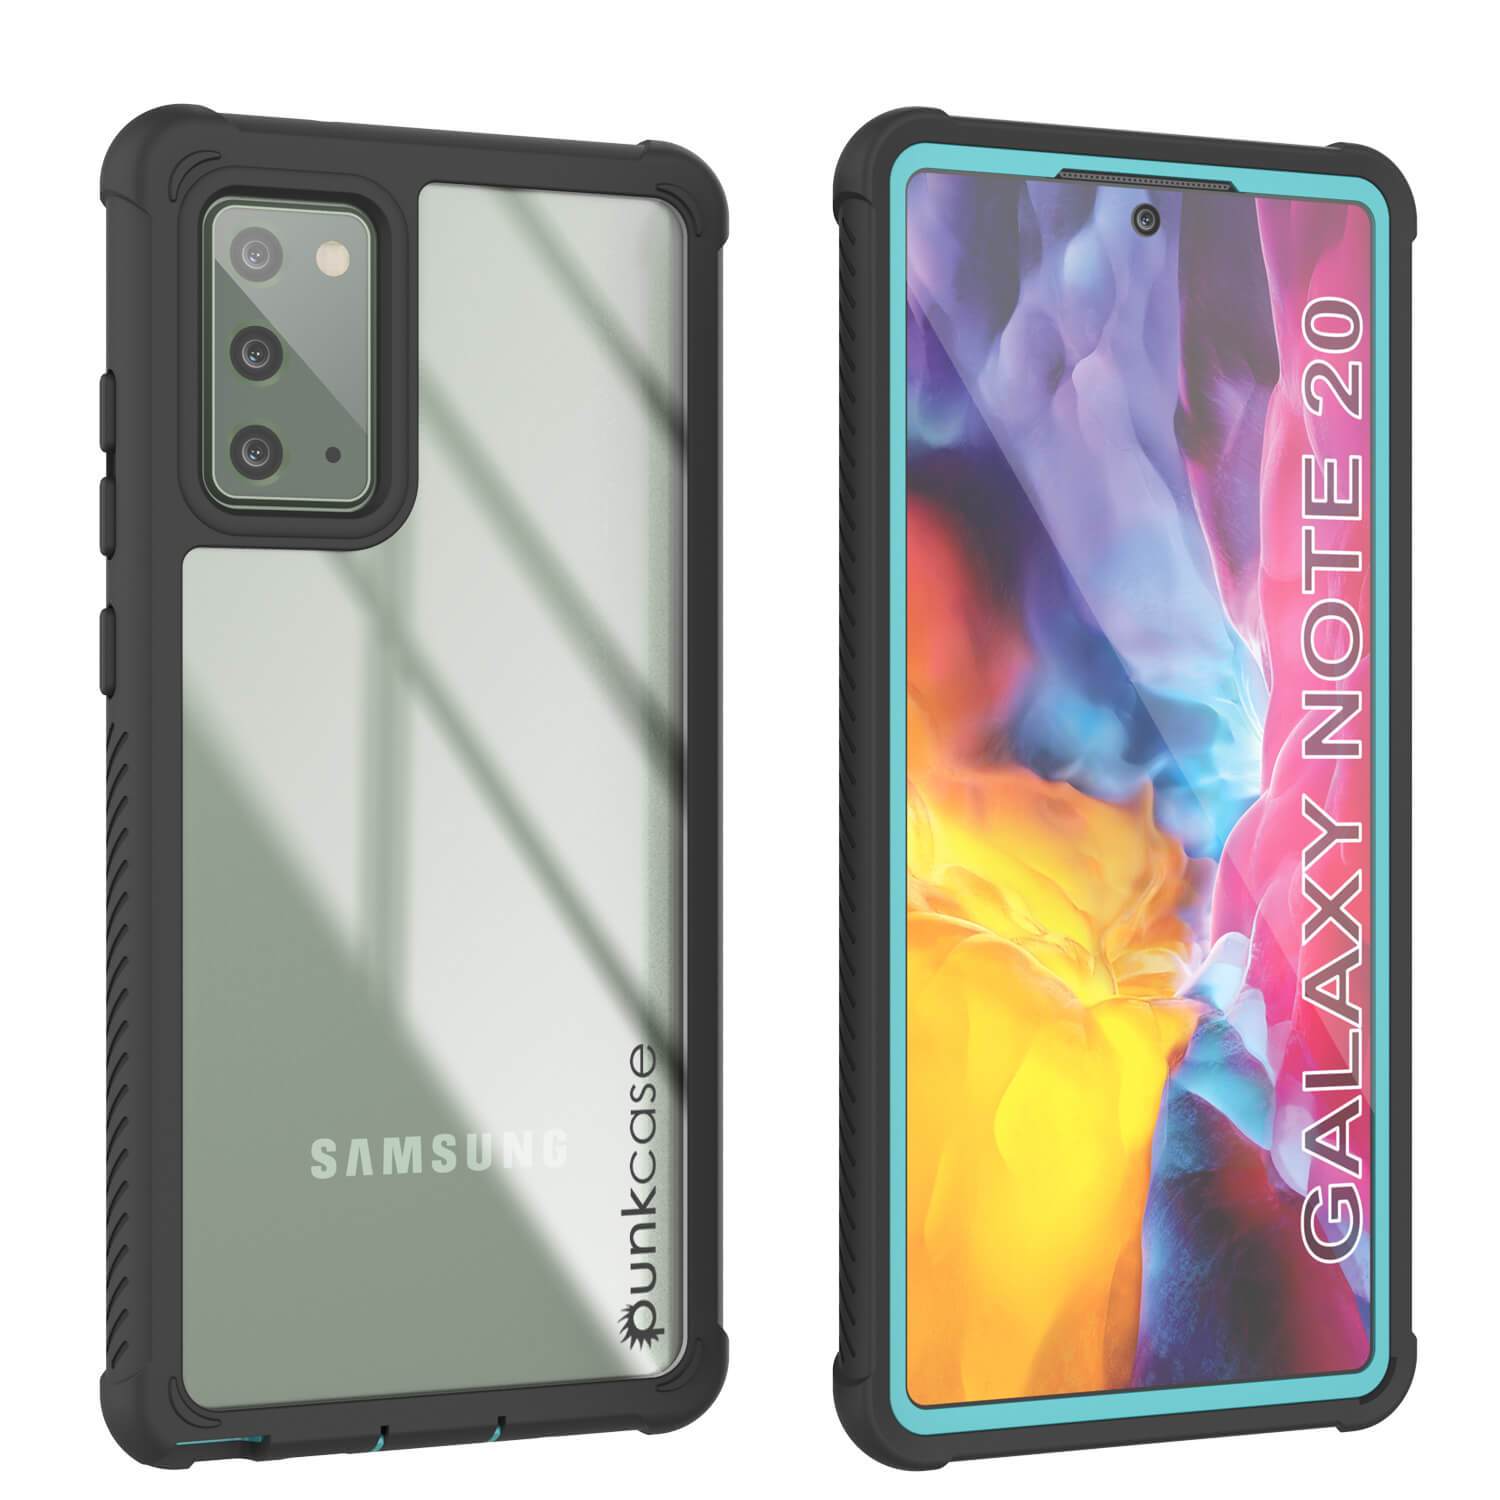 Punkcase Galaxy Note 20 Case, [Spartan Series] Teal Rugged Heavy Duty Cover W/Built in Screen Protector (Color in image: Teal)